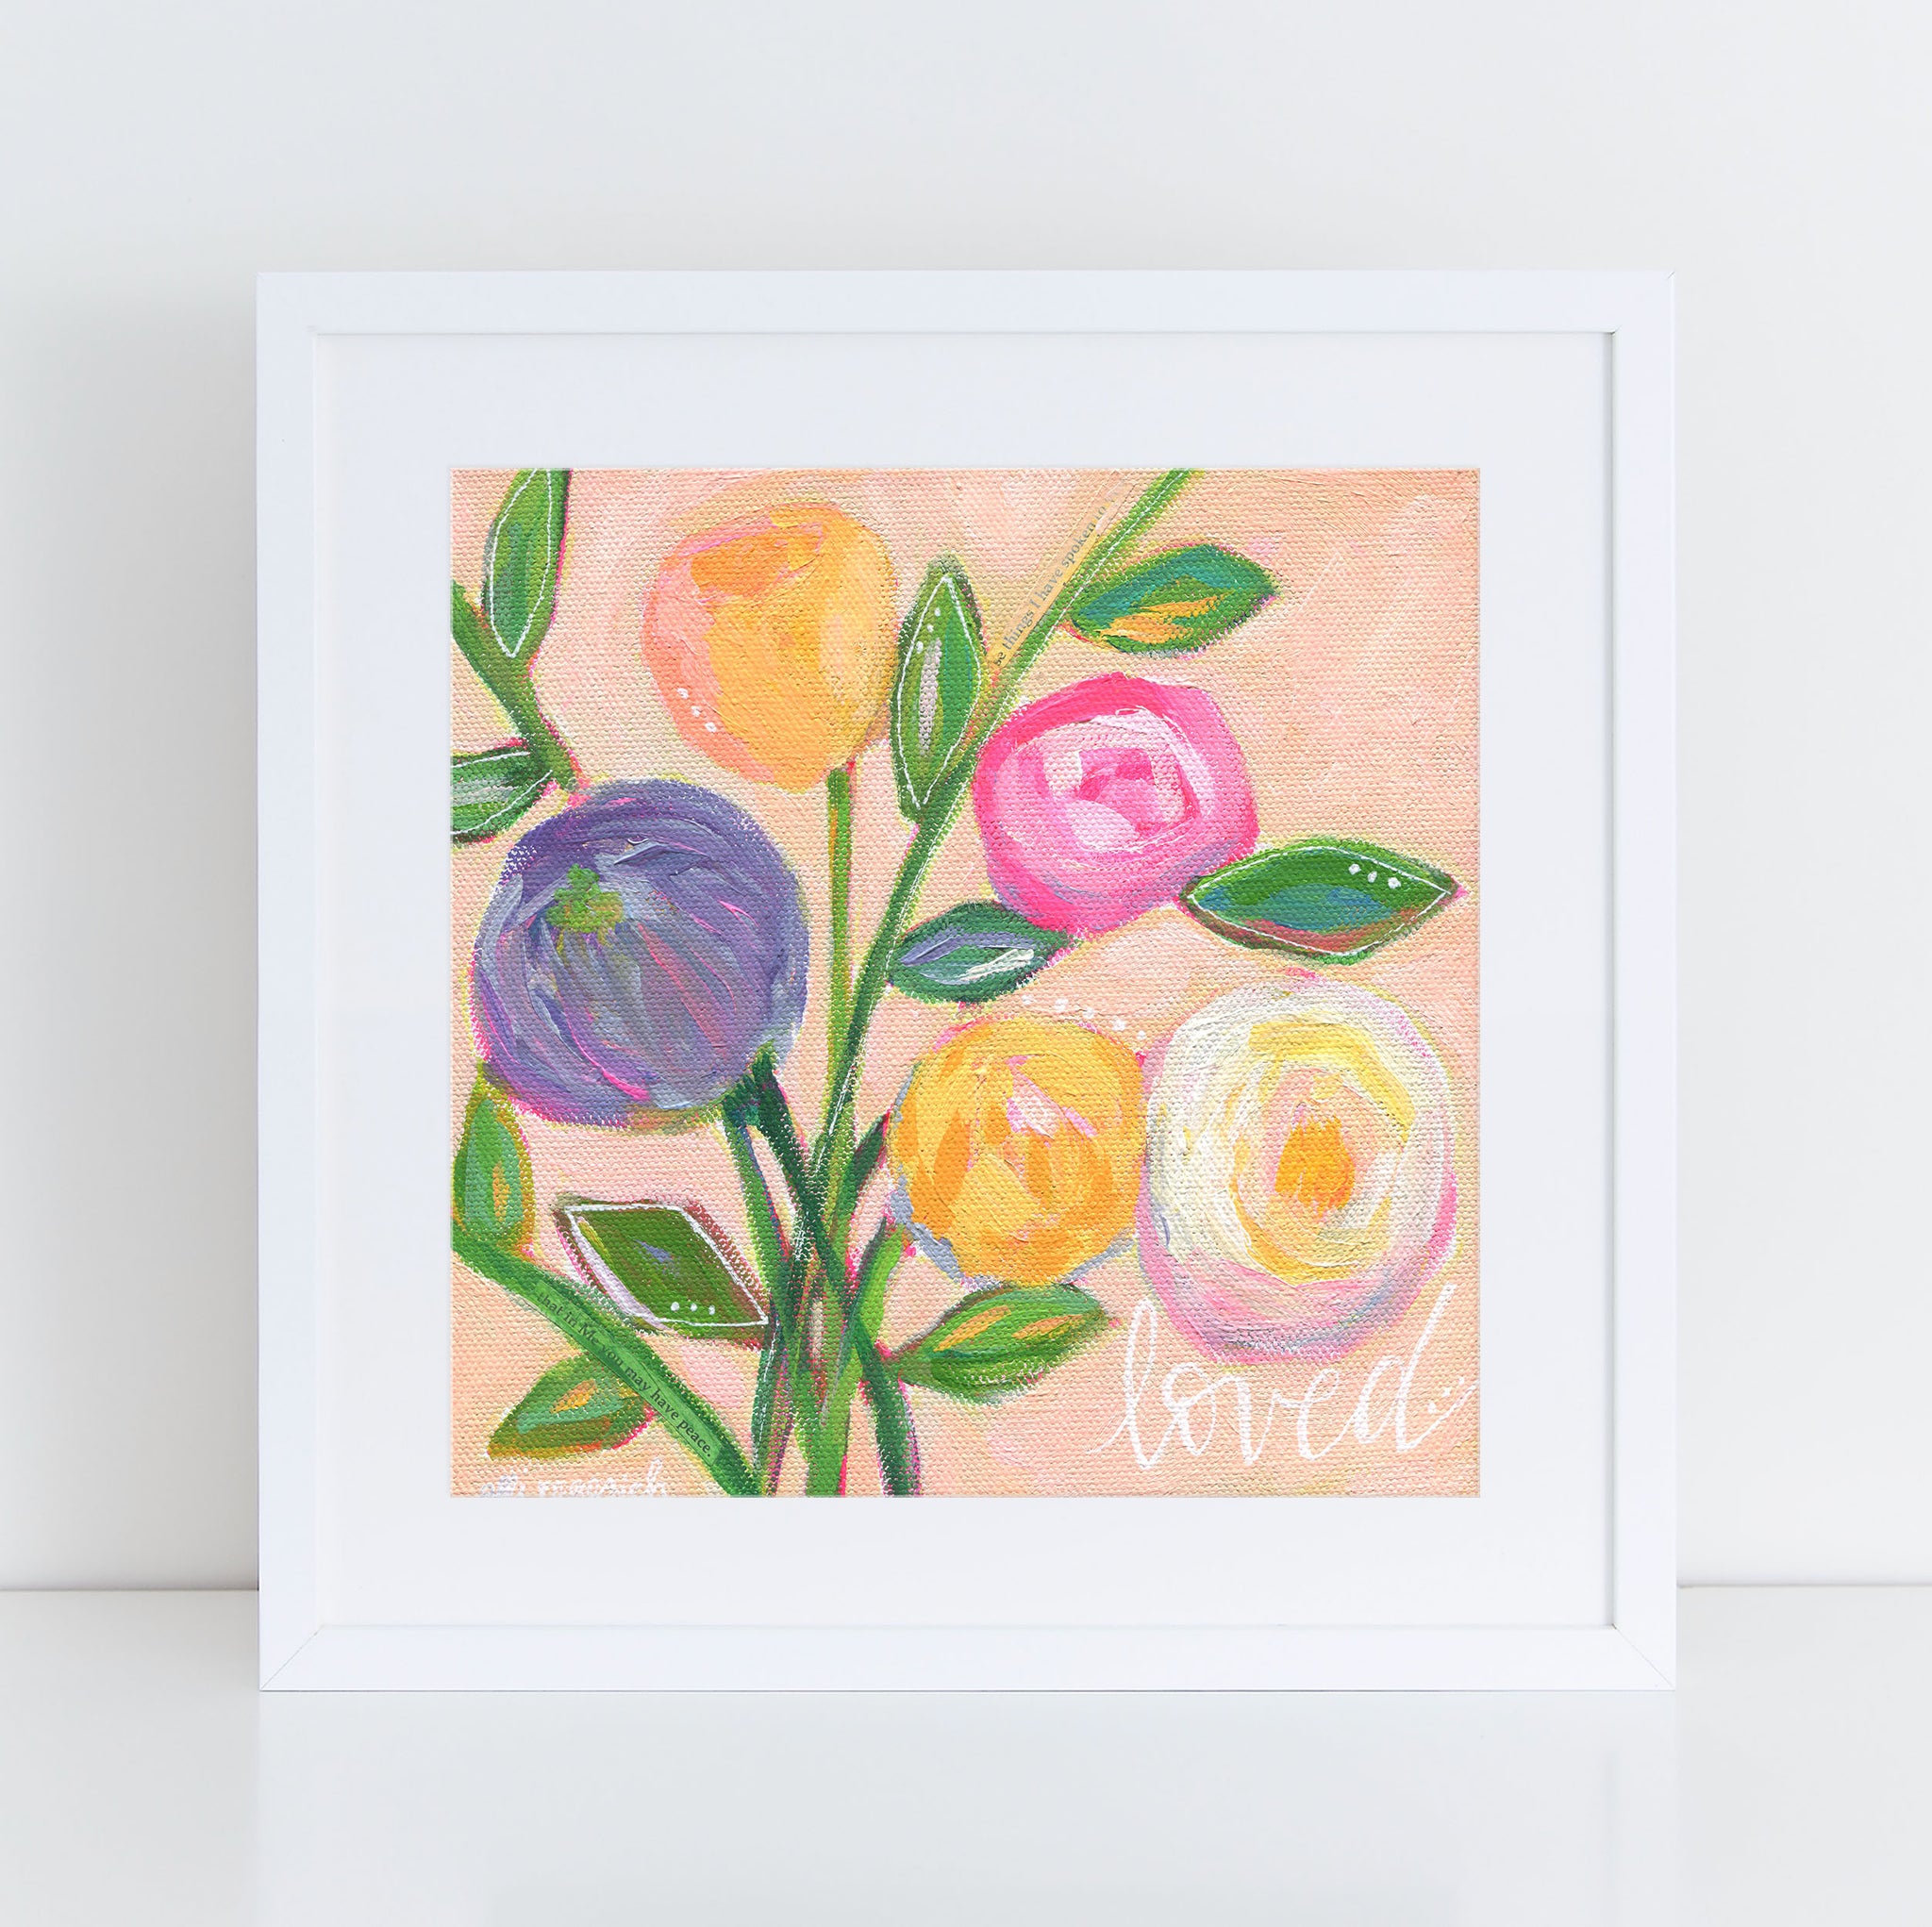 Art print: "Loved" Light Pink multi colored floral bouquet